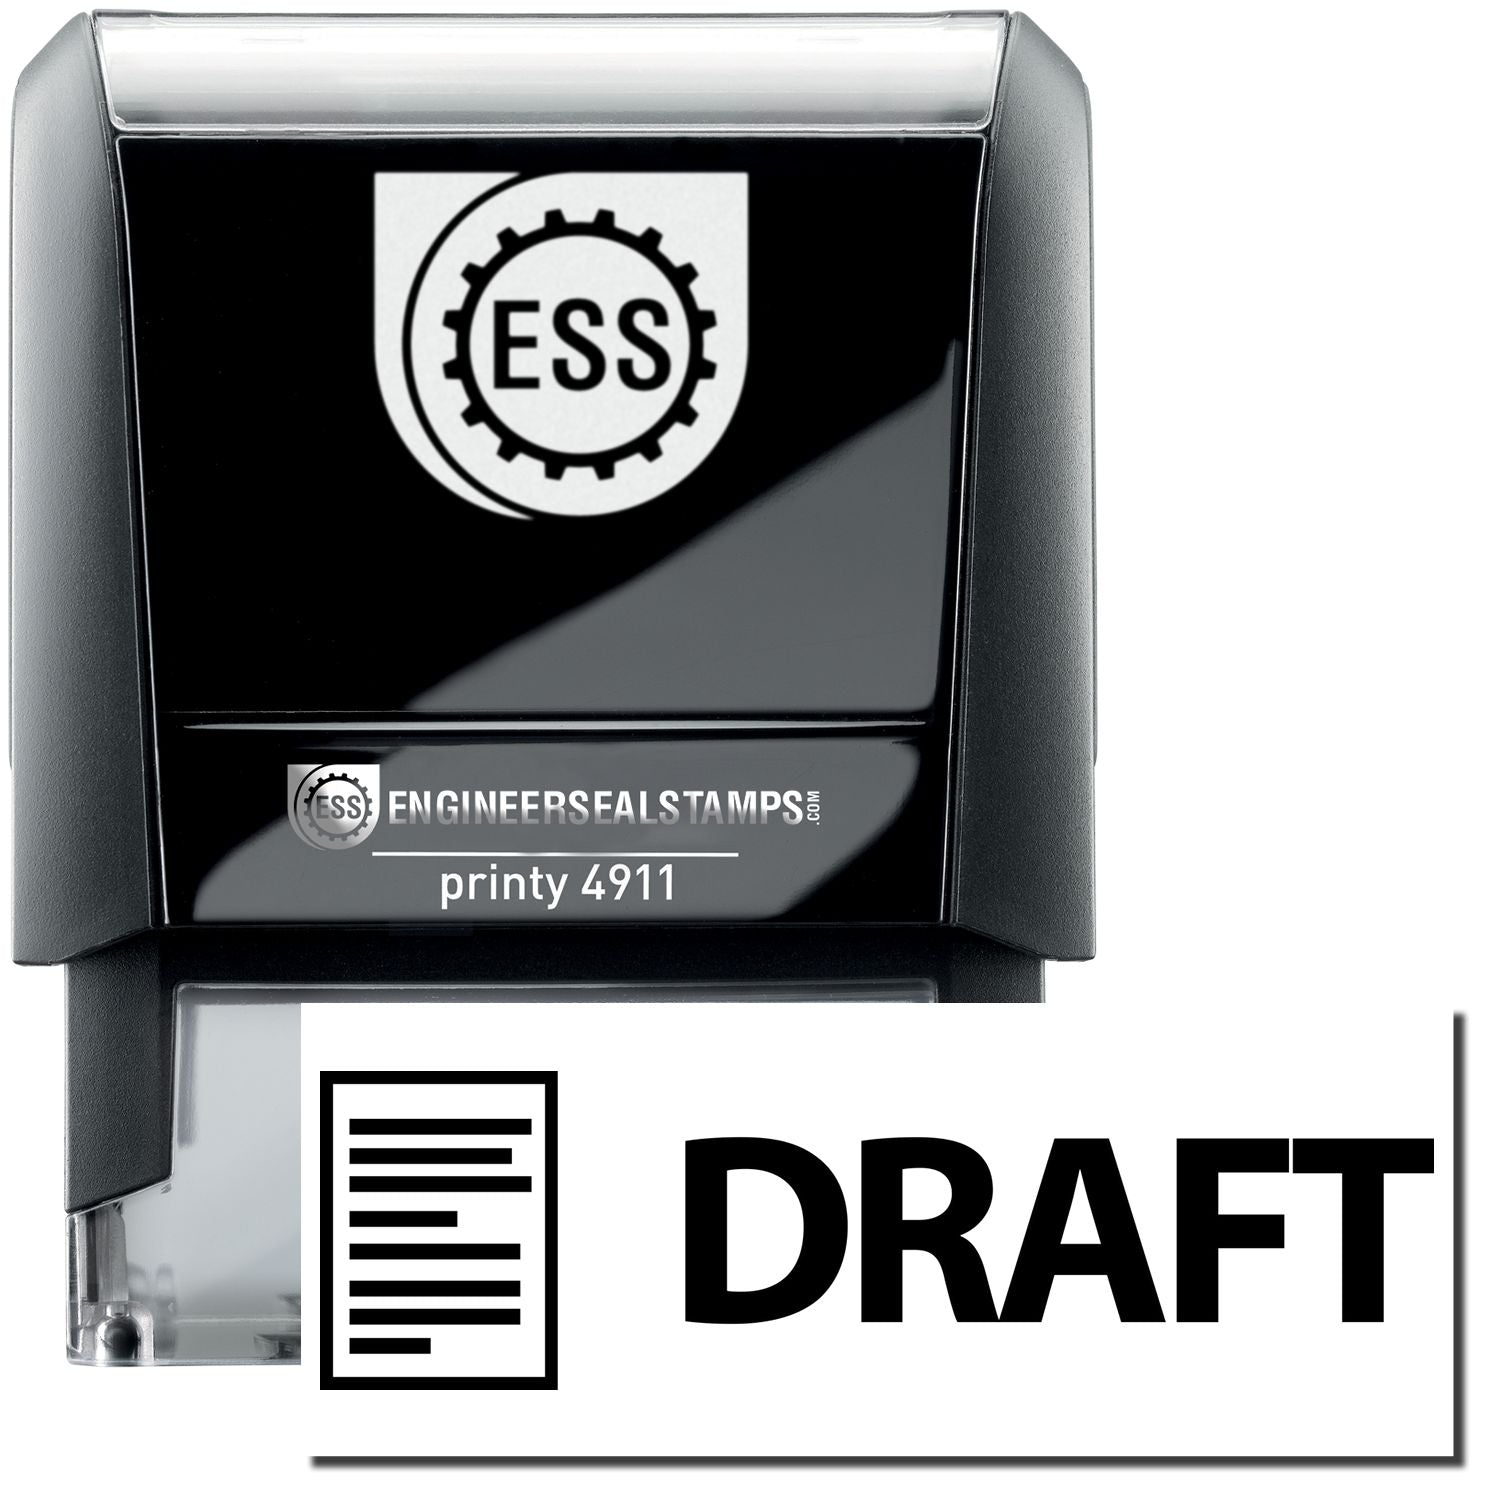 A self-inking stamp with a stamped image showing how the text "DRAFT" in an eye-catching font and an image of a letter on the left is displayed after stamping.